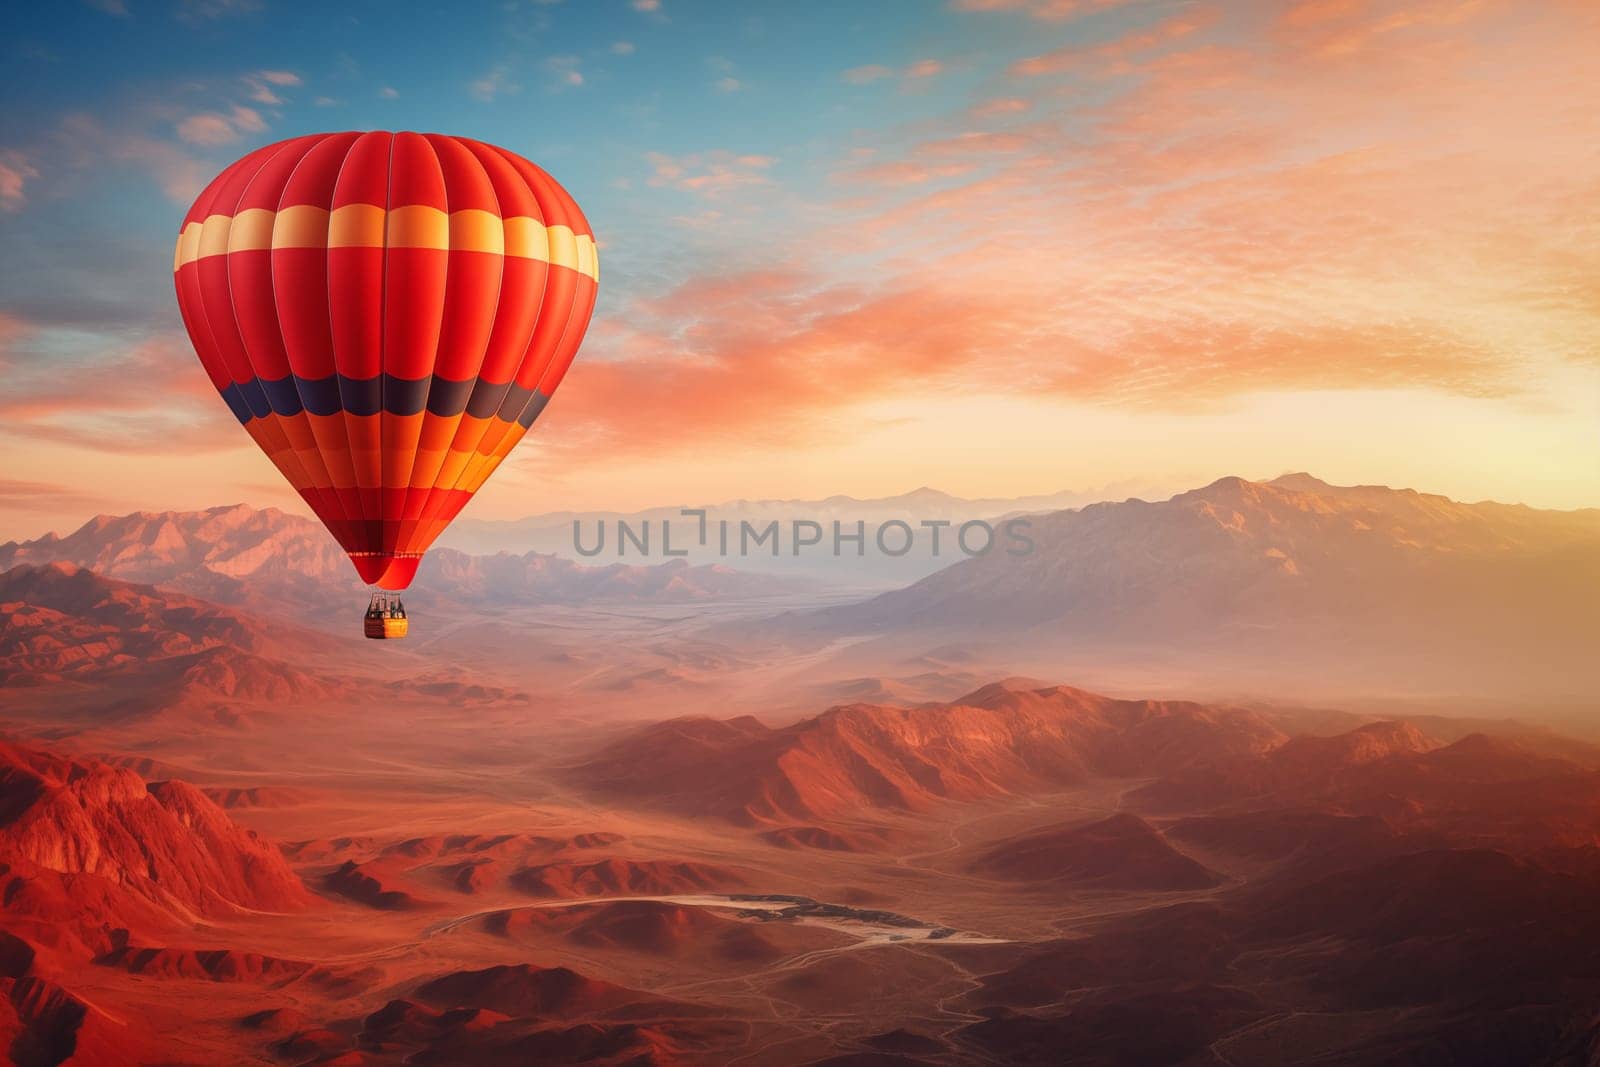 Colorful hot air balloon over desert mountains at sunset by dimol